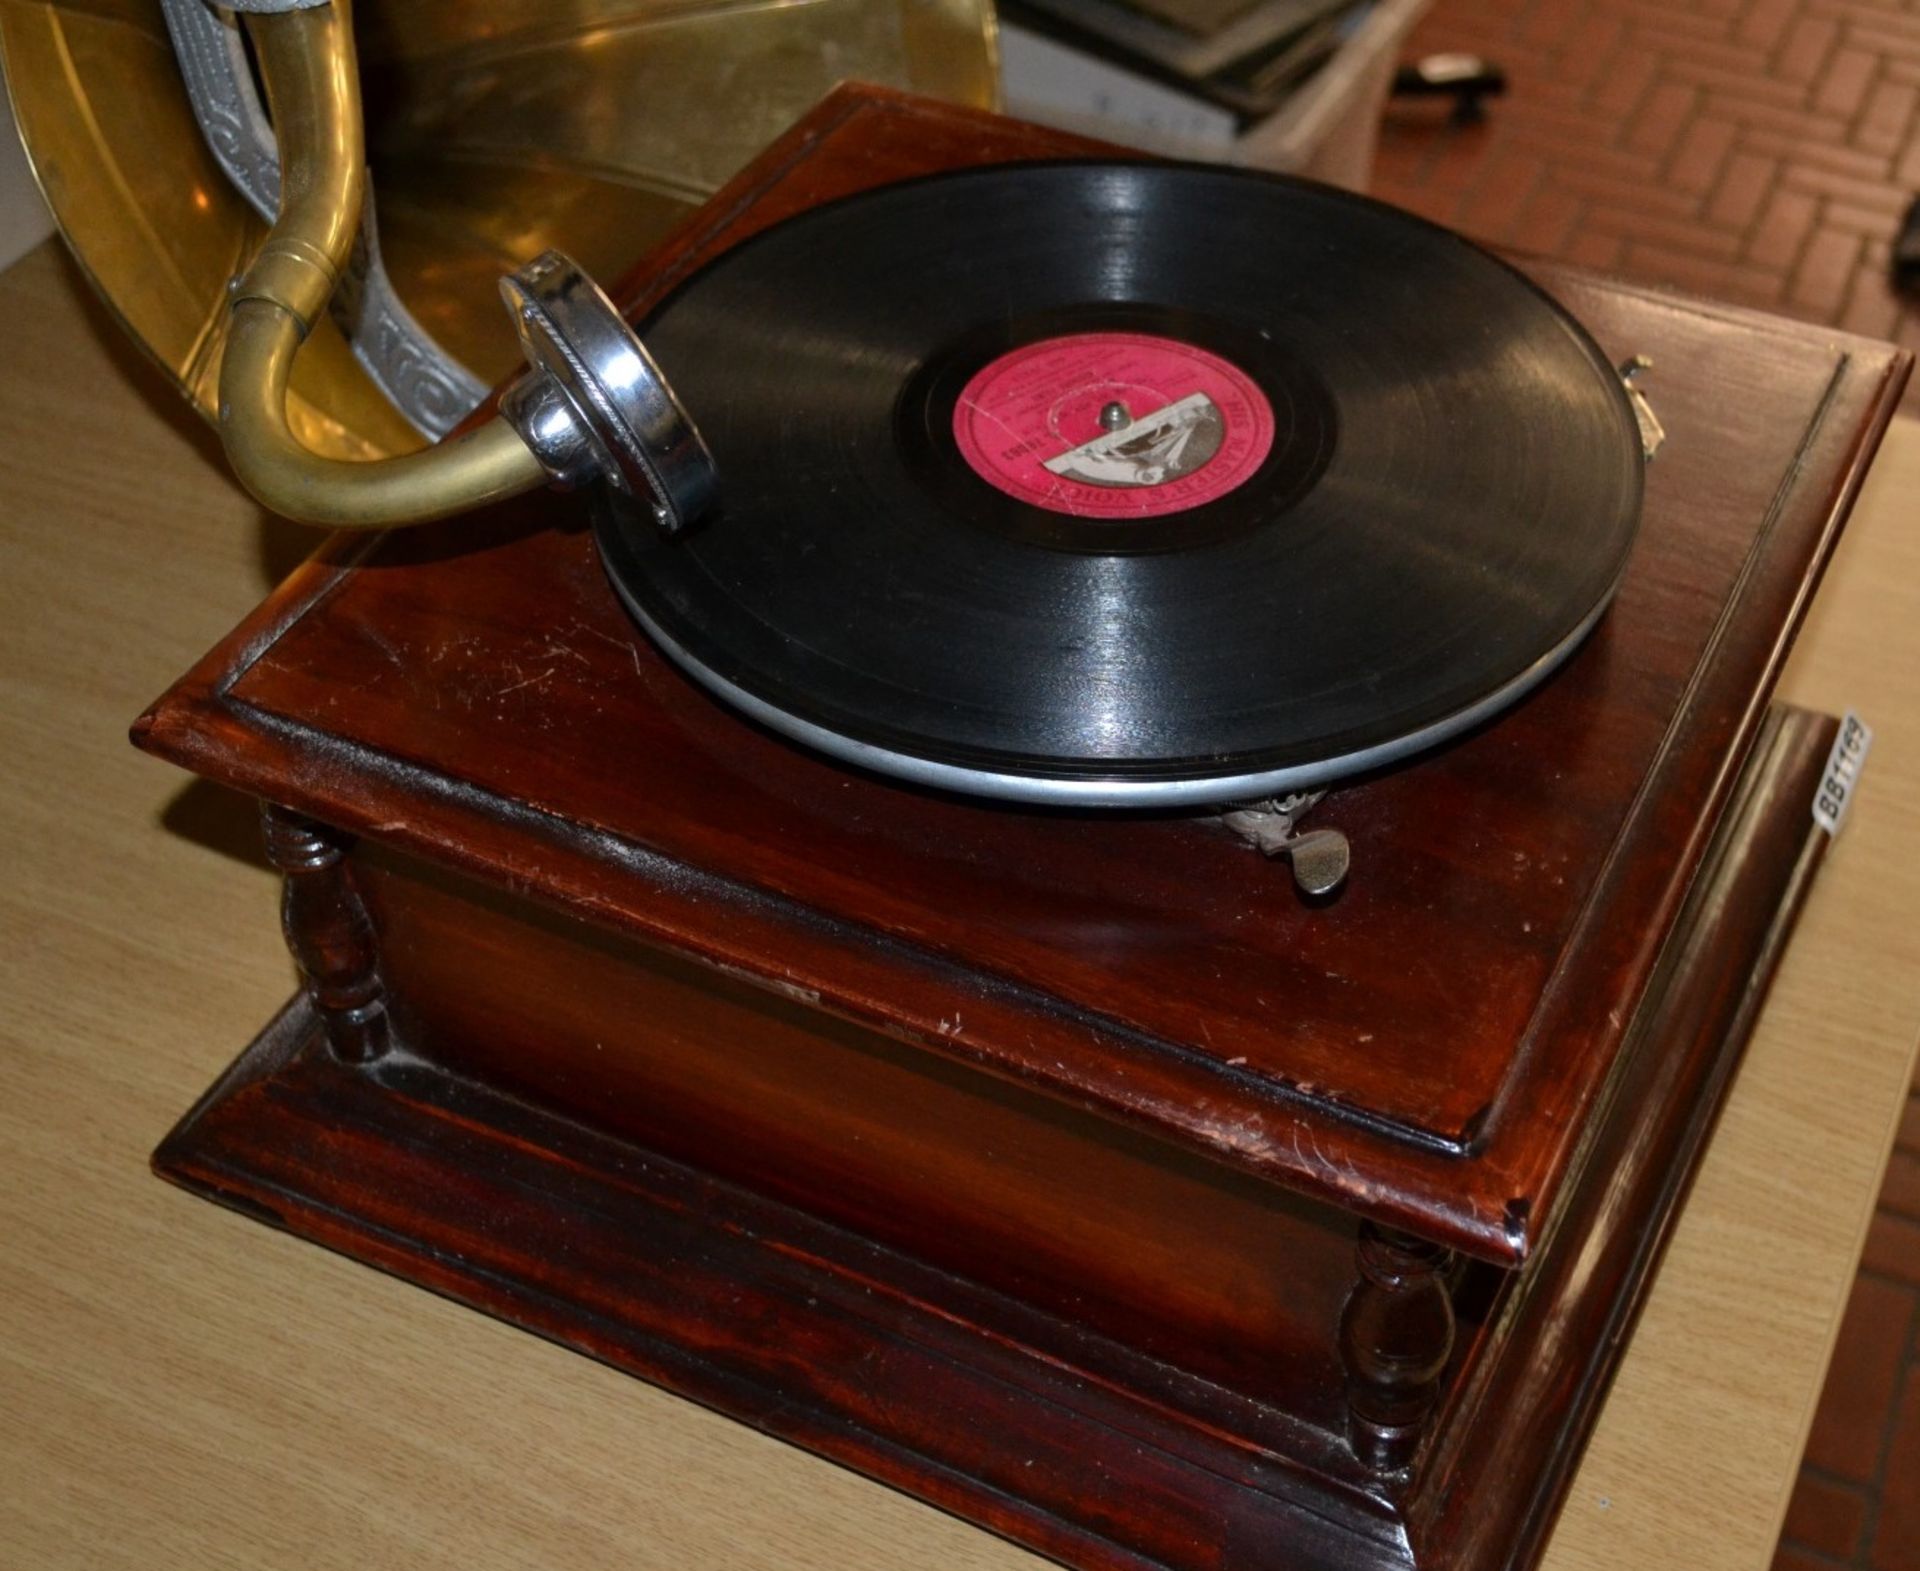 1 x 'His Masters Voice' Branded Gramophone - Dimensions: 37 x 37 x H21cm - Ref BB1165 / KS - Image 3 of 16